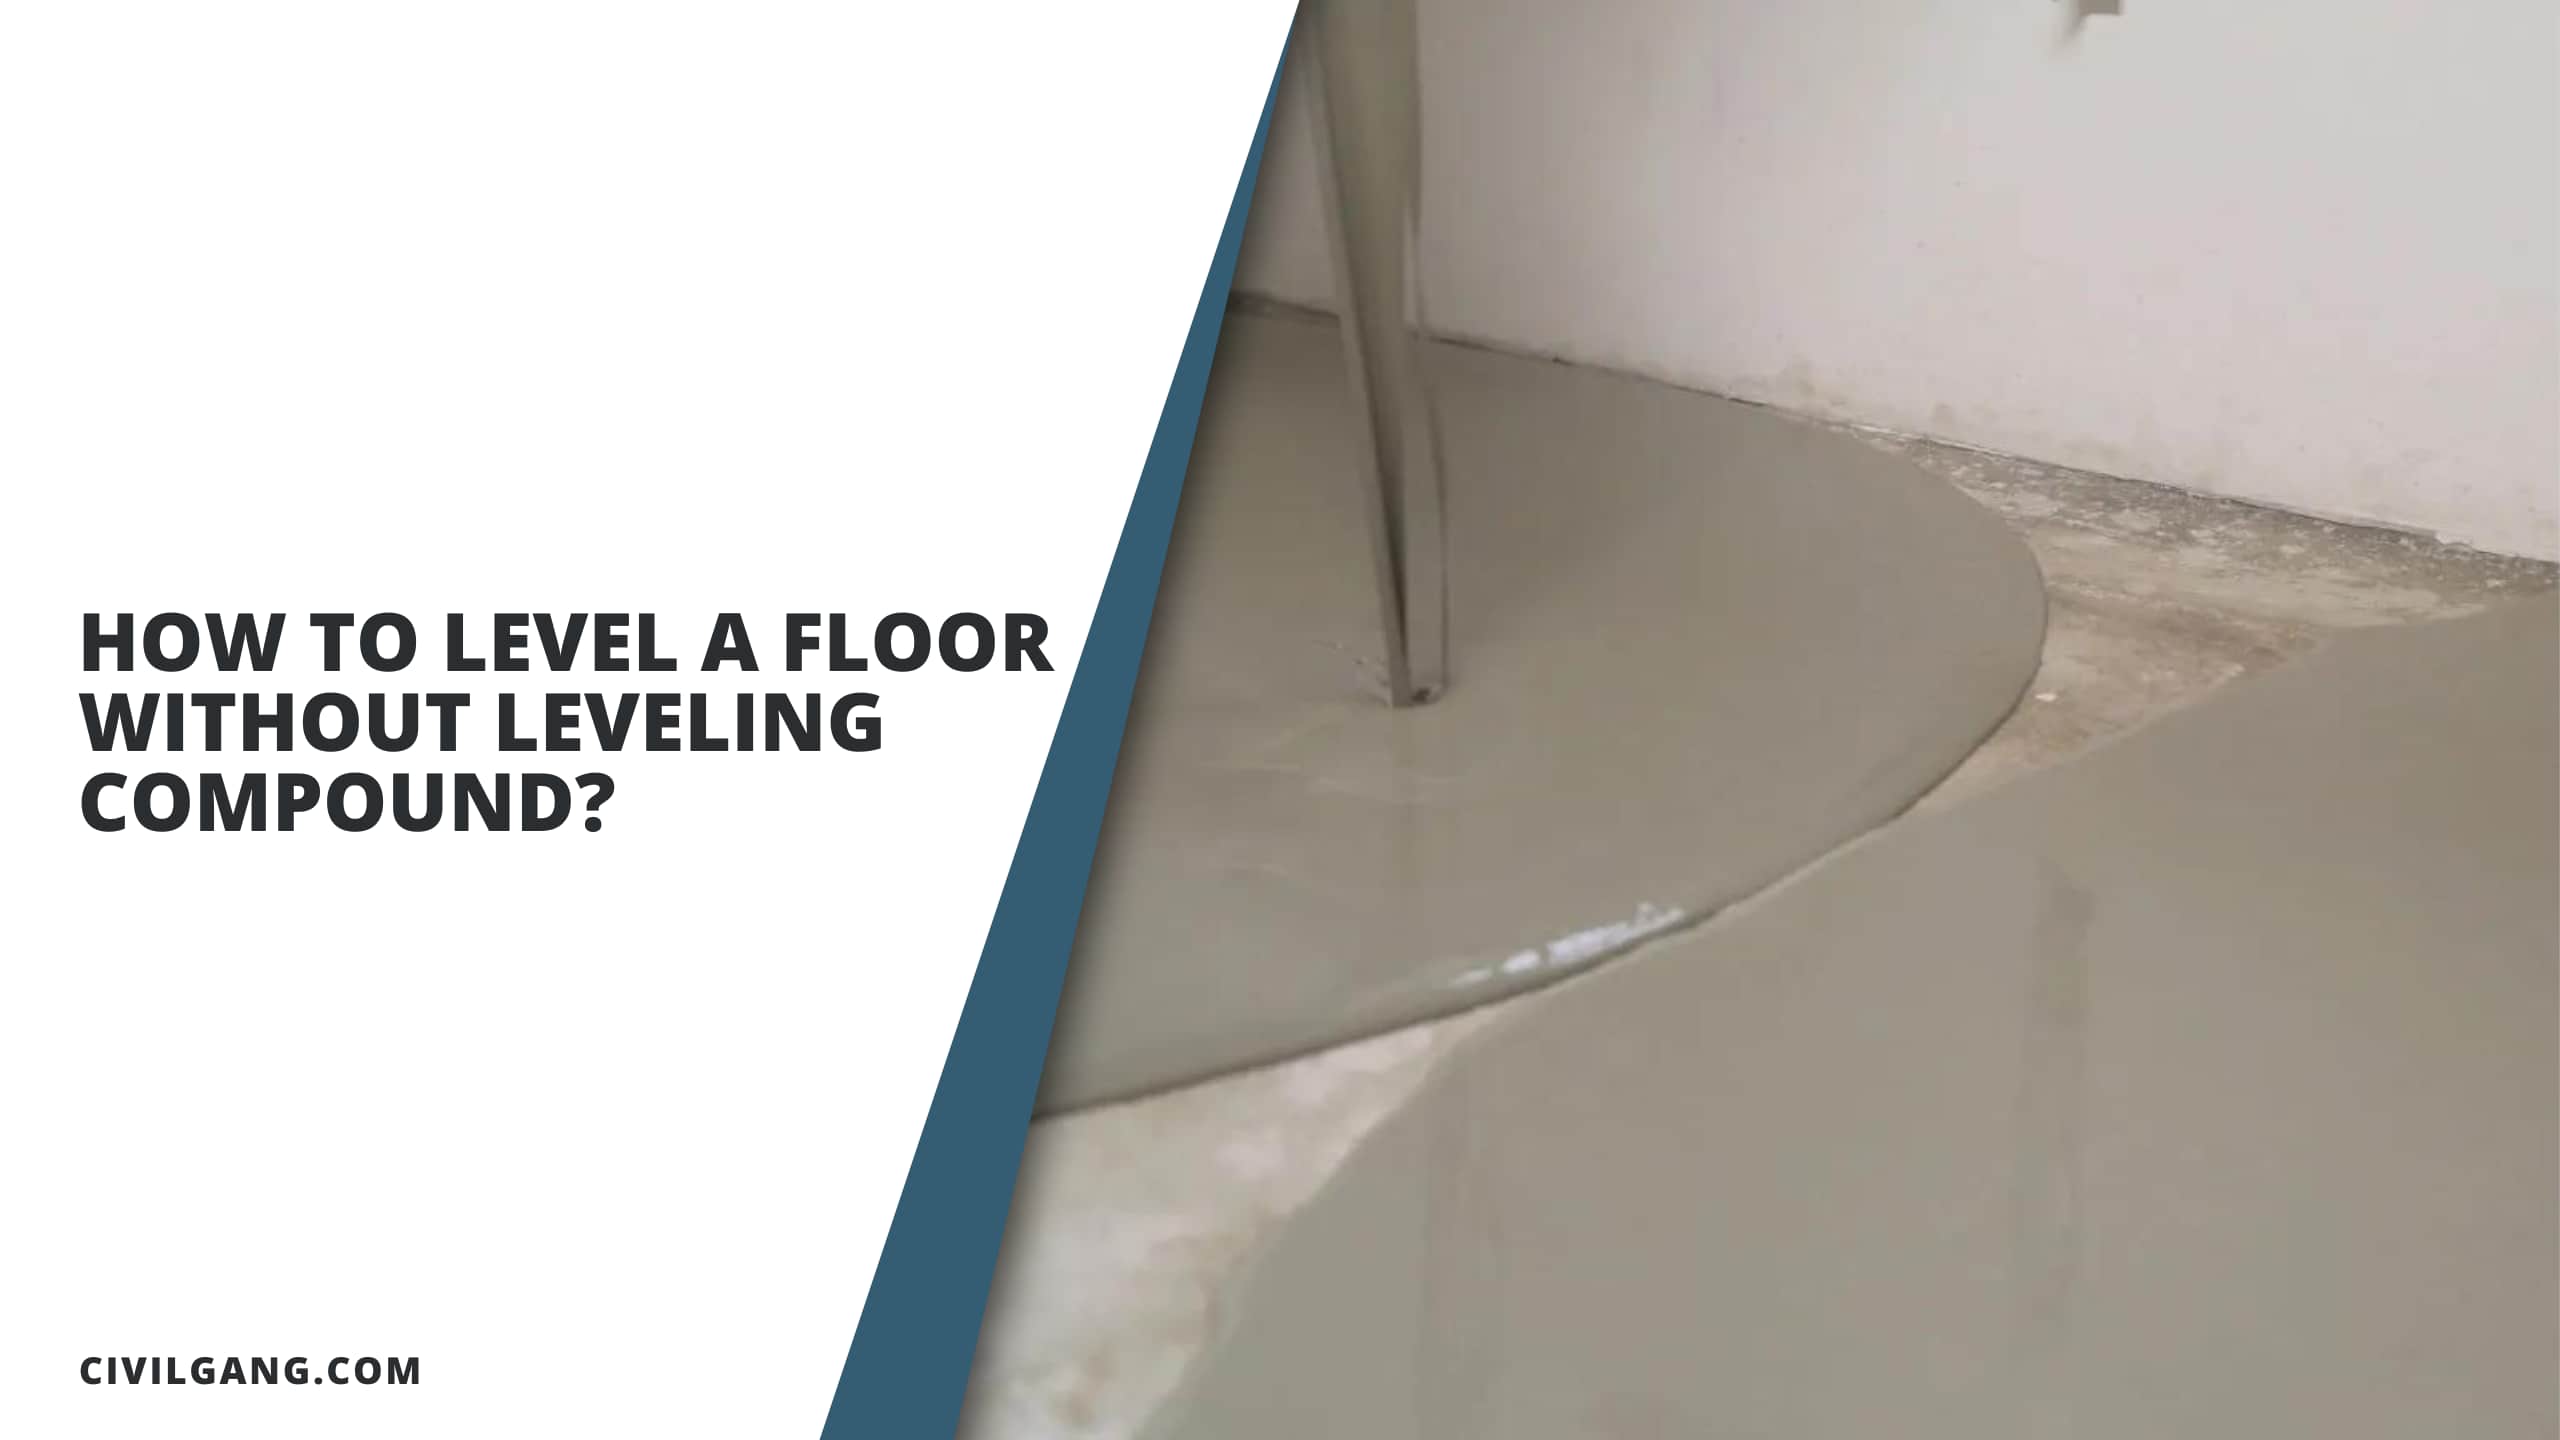 How to Level a Floor Without Leveling Compound?